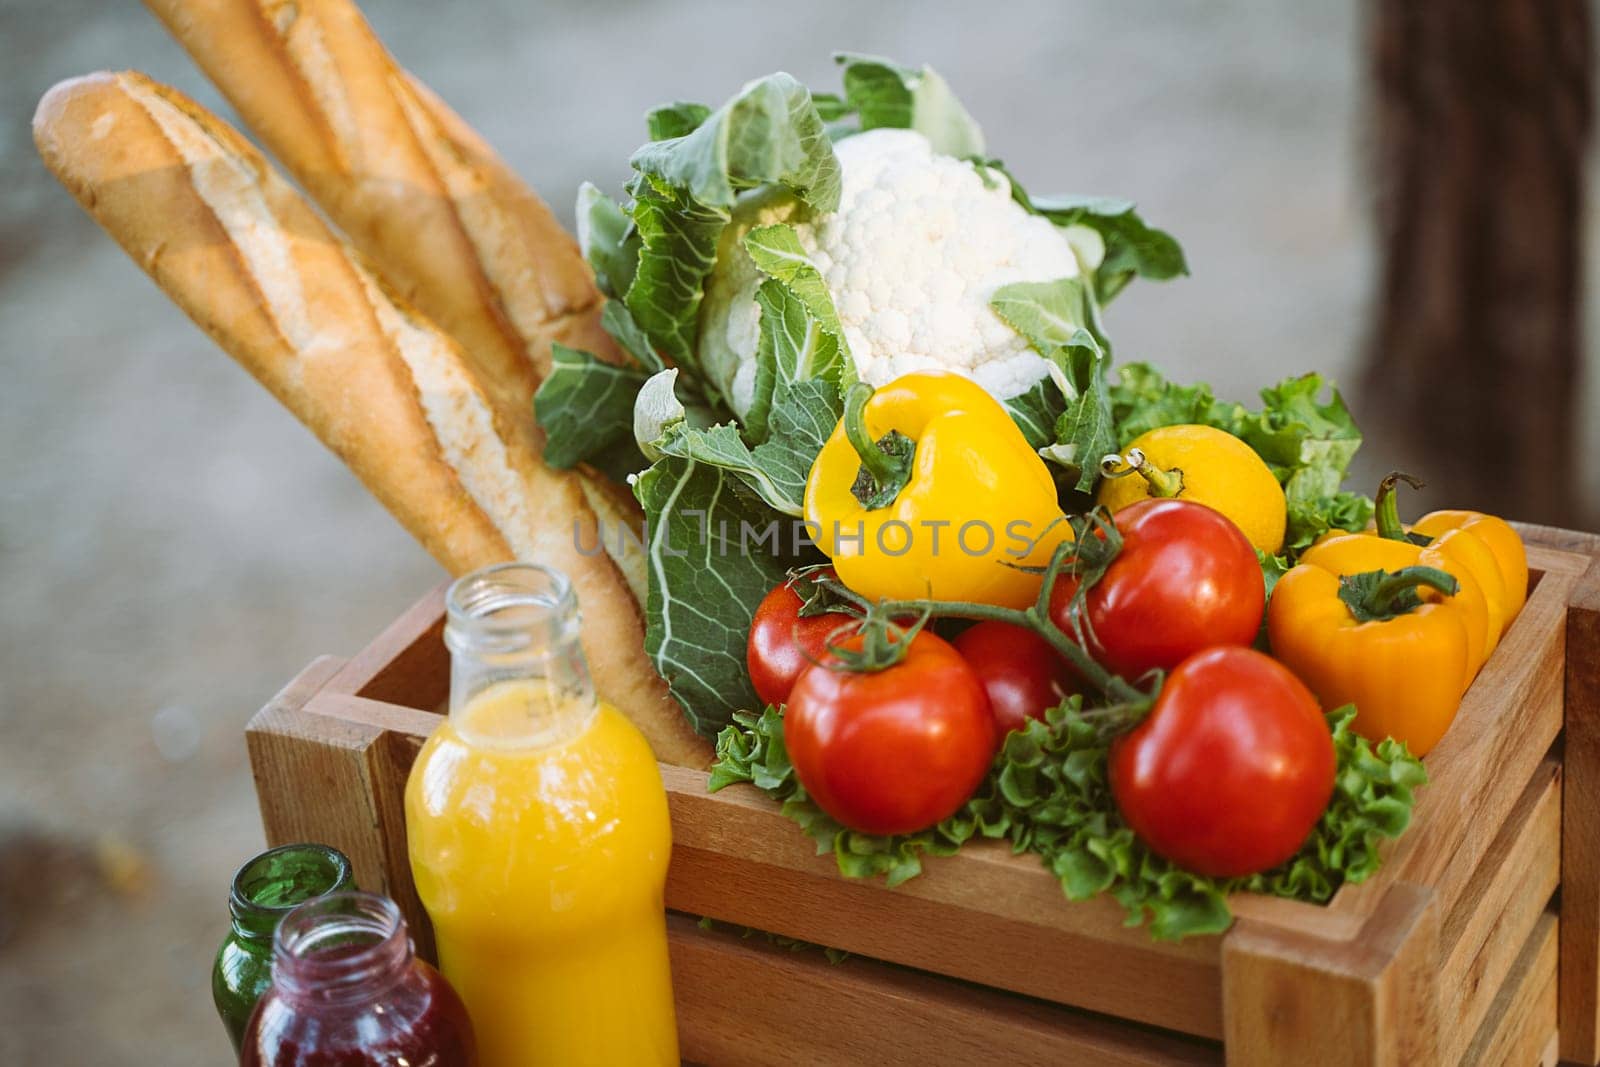 Wooden crate organic farmland vegetables, bread baguettes, fruits, multicolor juice bottles, croissants, dark wood table. Framed crate with cauliflower, sweet pepper, tomatoes, yellow quince, apples